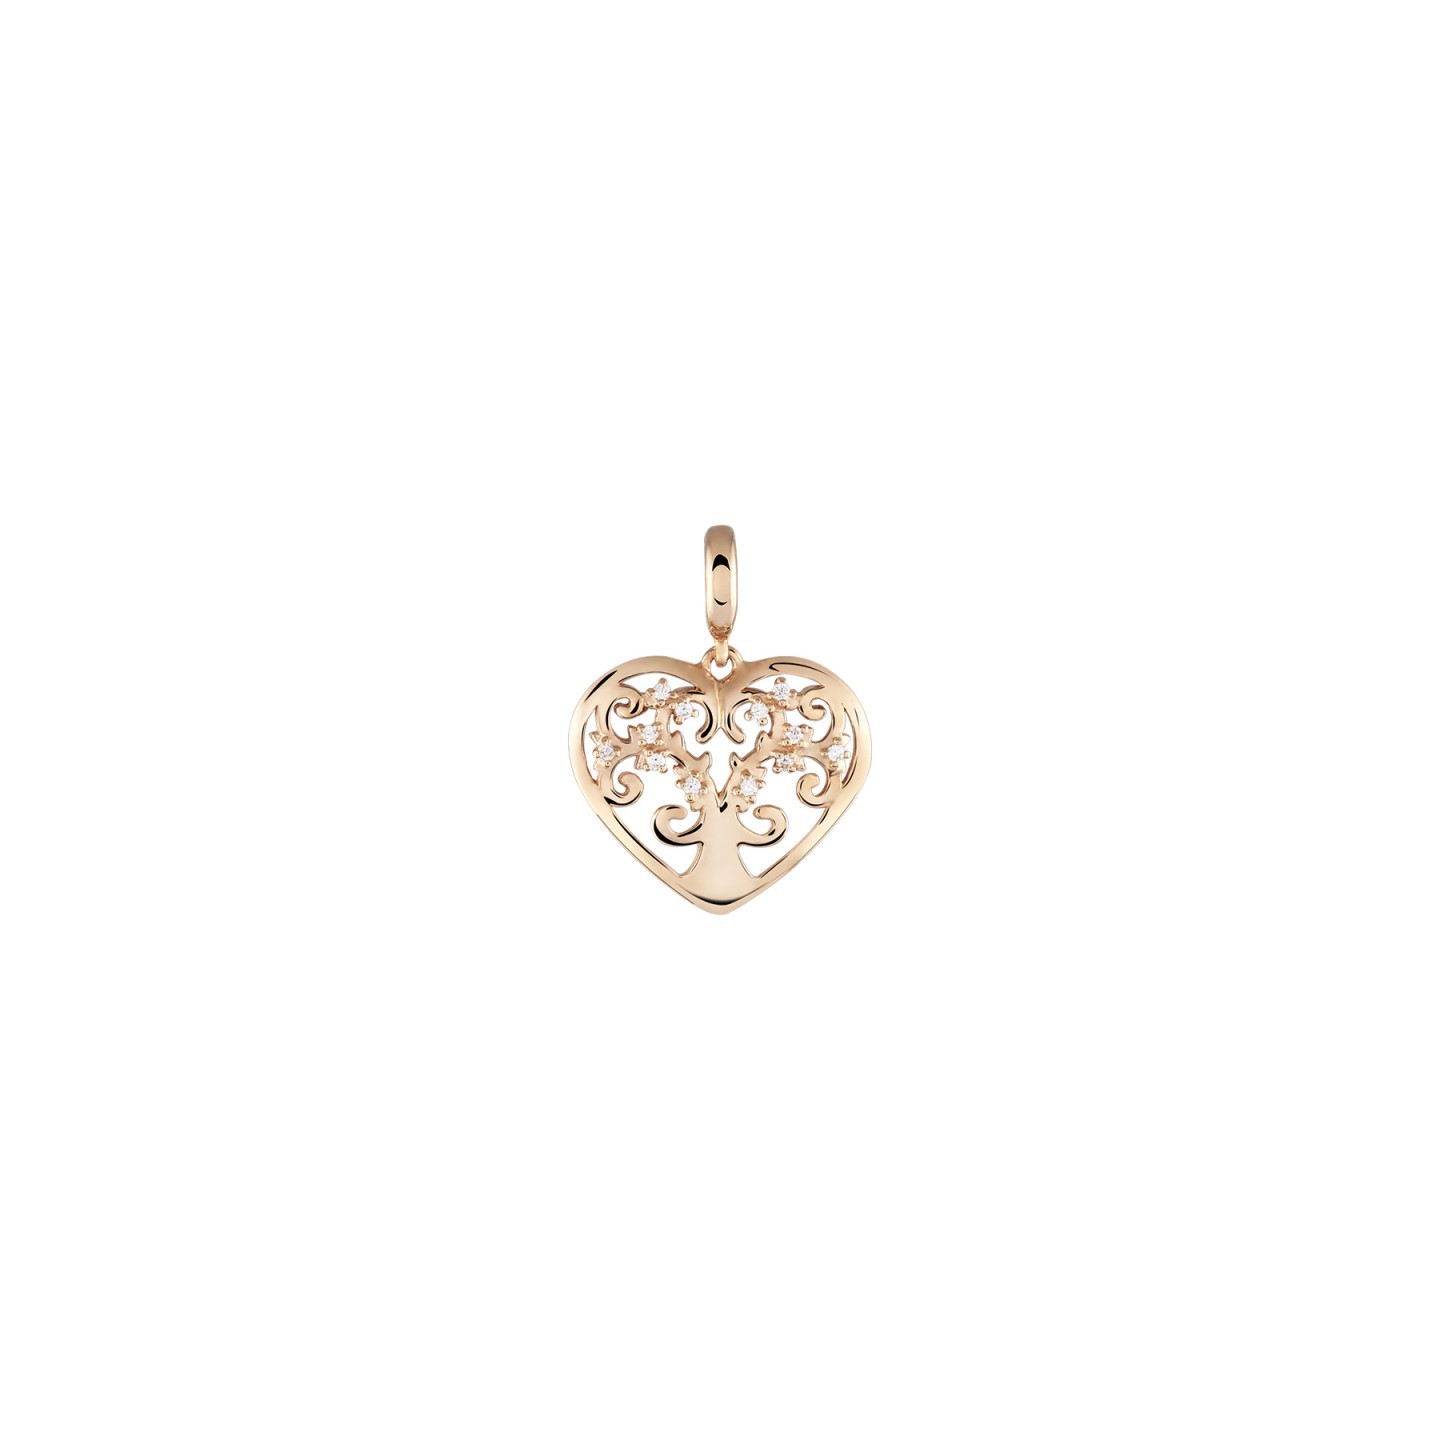 Charm BOW HAPPY Love Stories Heart Tree of Life Rose Gold